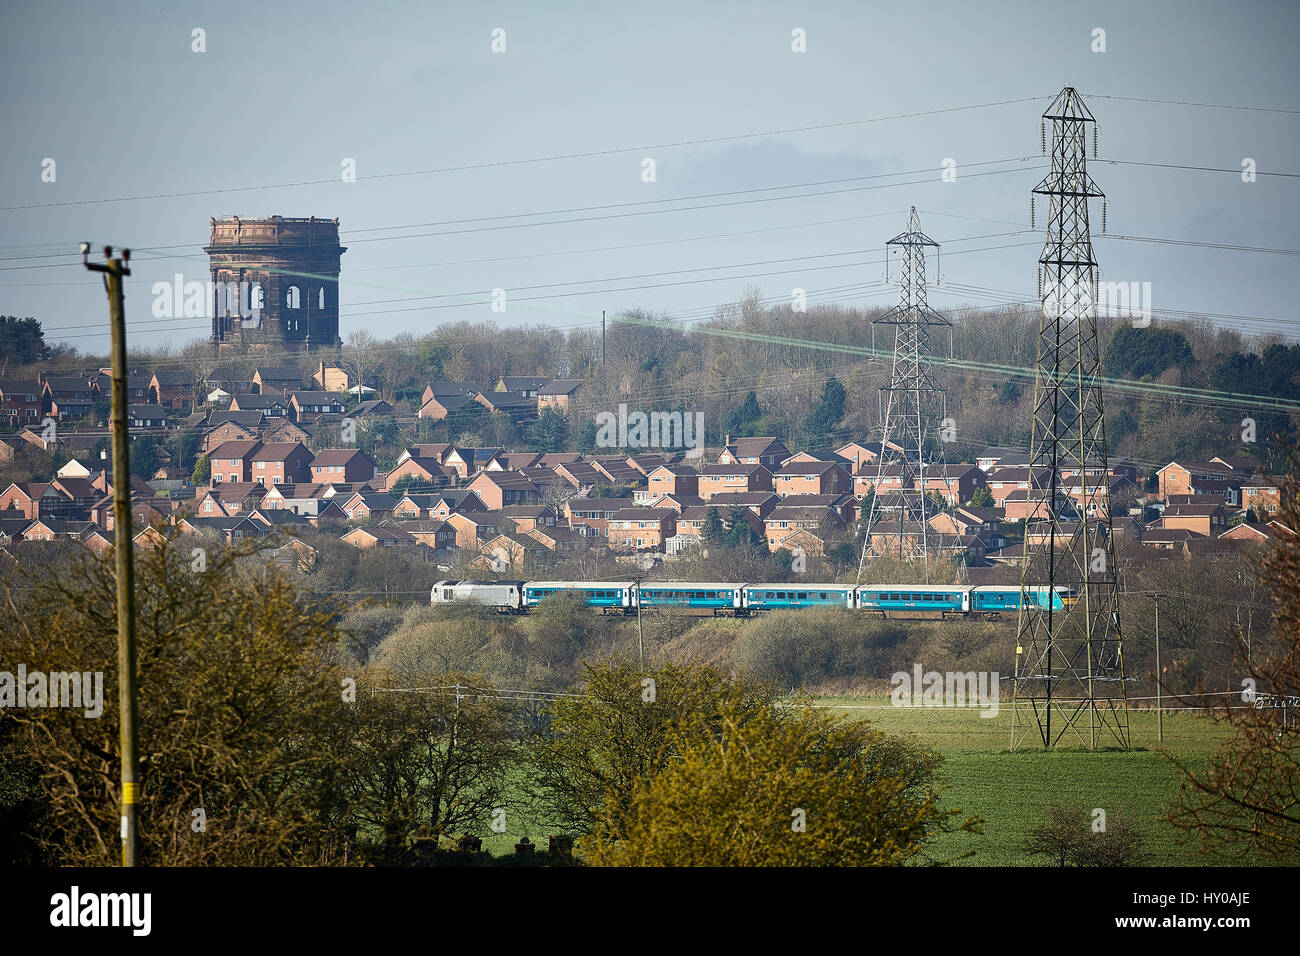 Arriva Trains Wales passing, on a Manchester to Wales service Norton Water Tower Cheshire, England. UK. Stock Photo